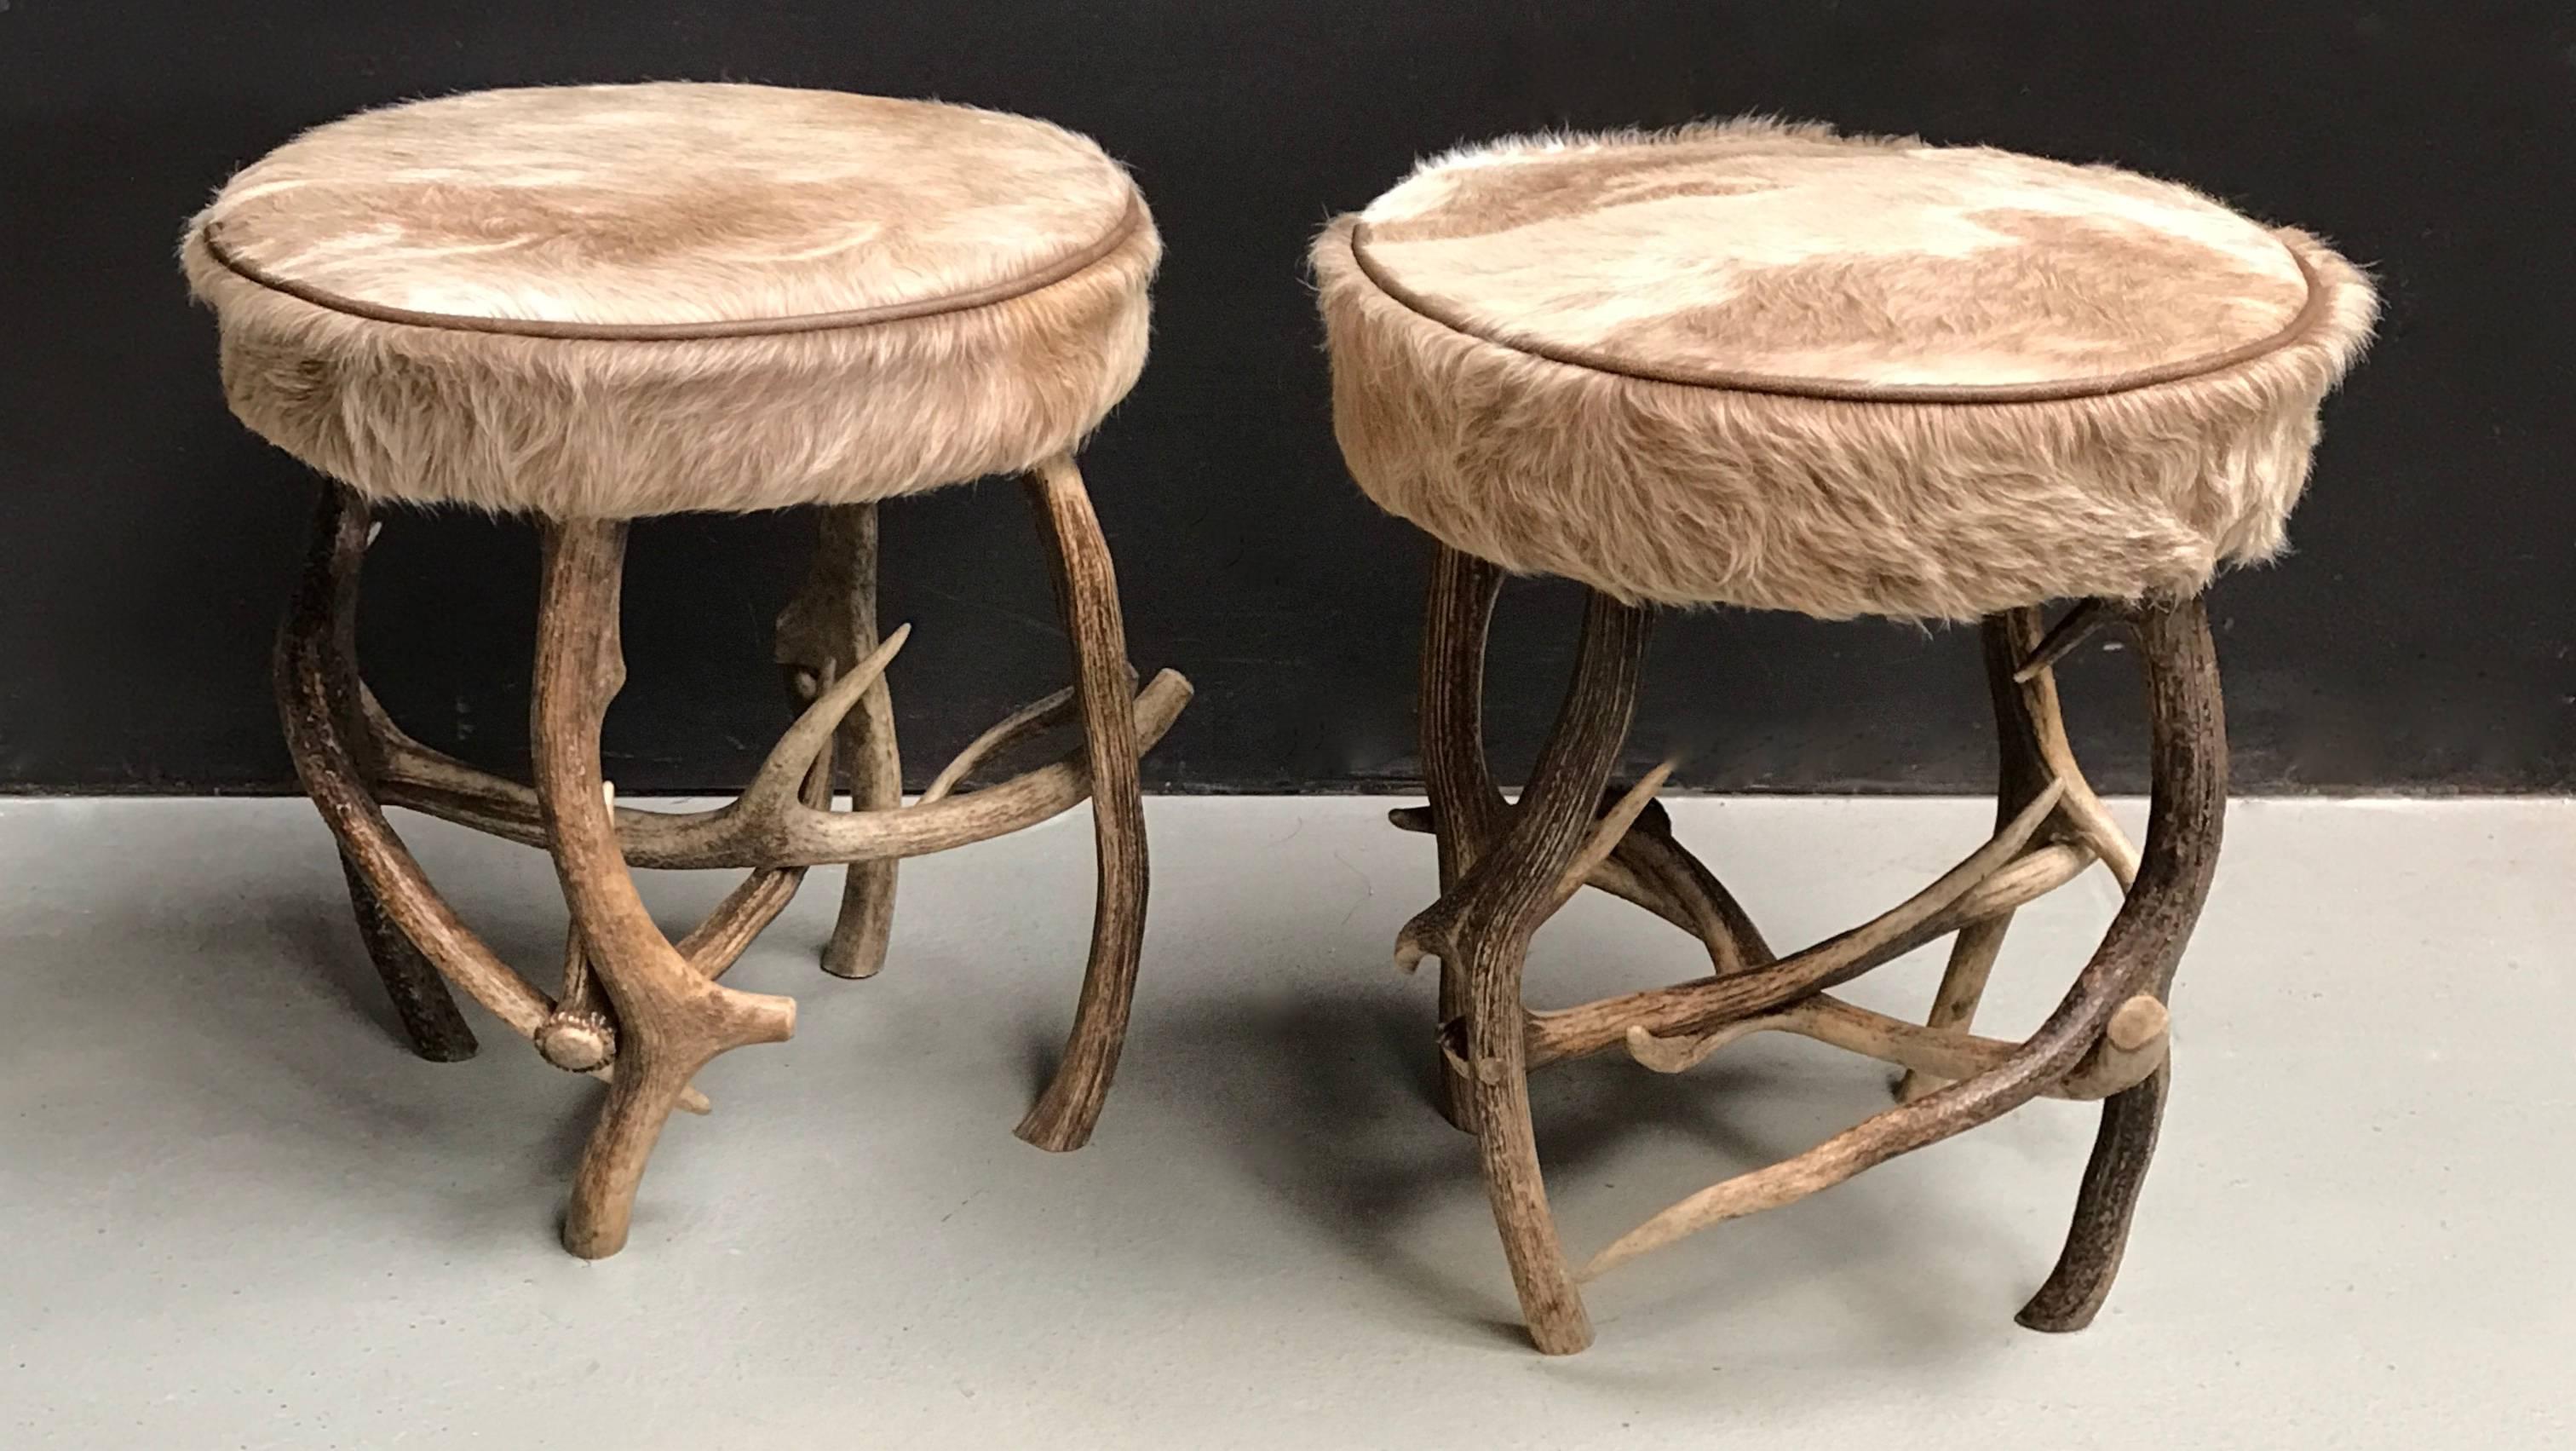 Pair of antler stools made of red deer antlers.
Both stools are upholstered out of one A-grade South American cowhide to make the pair of stools a perfect match.